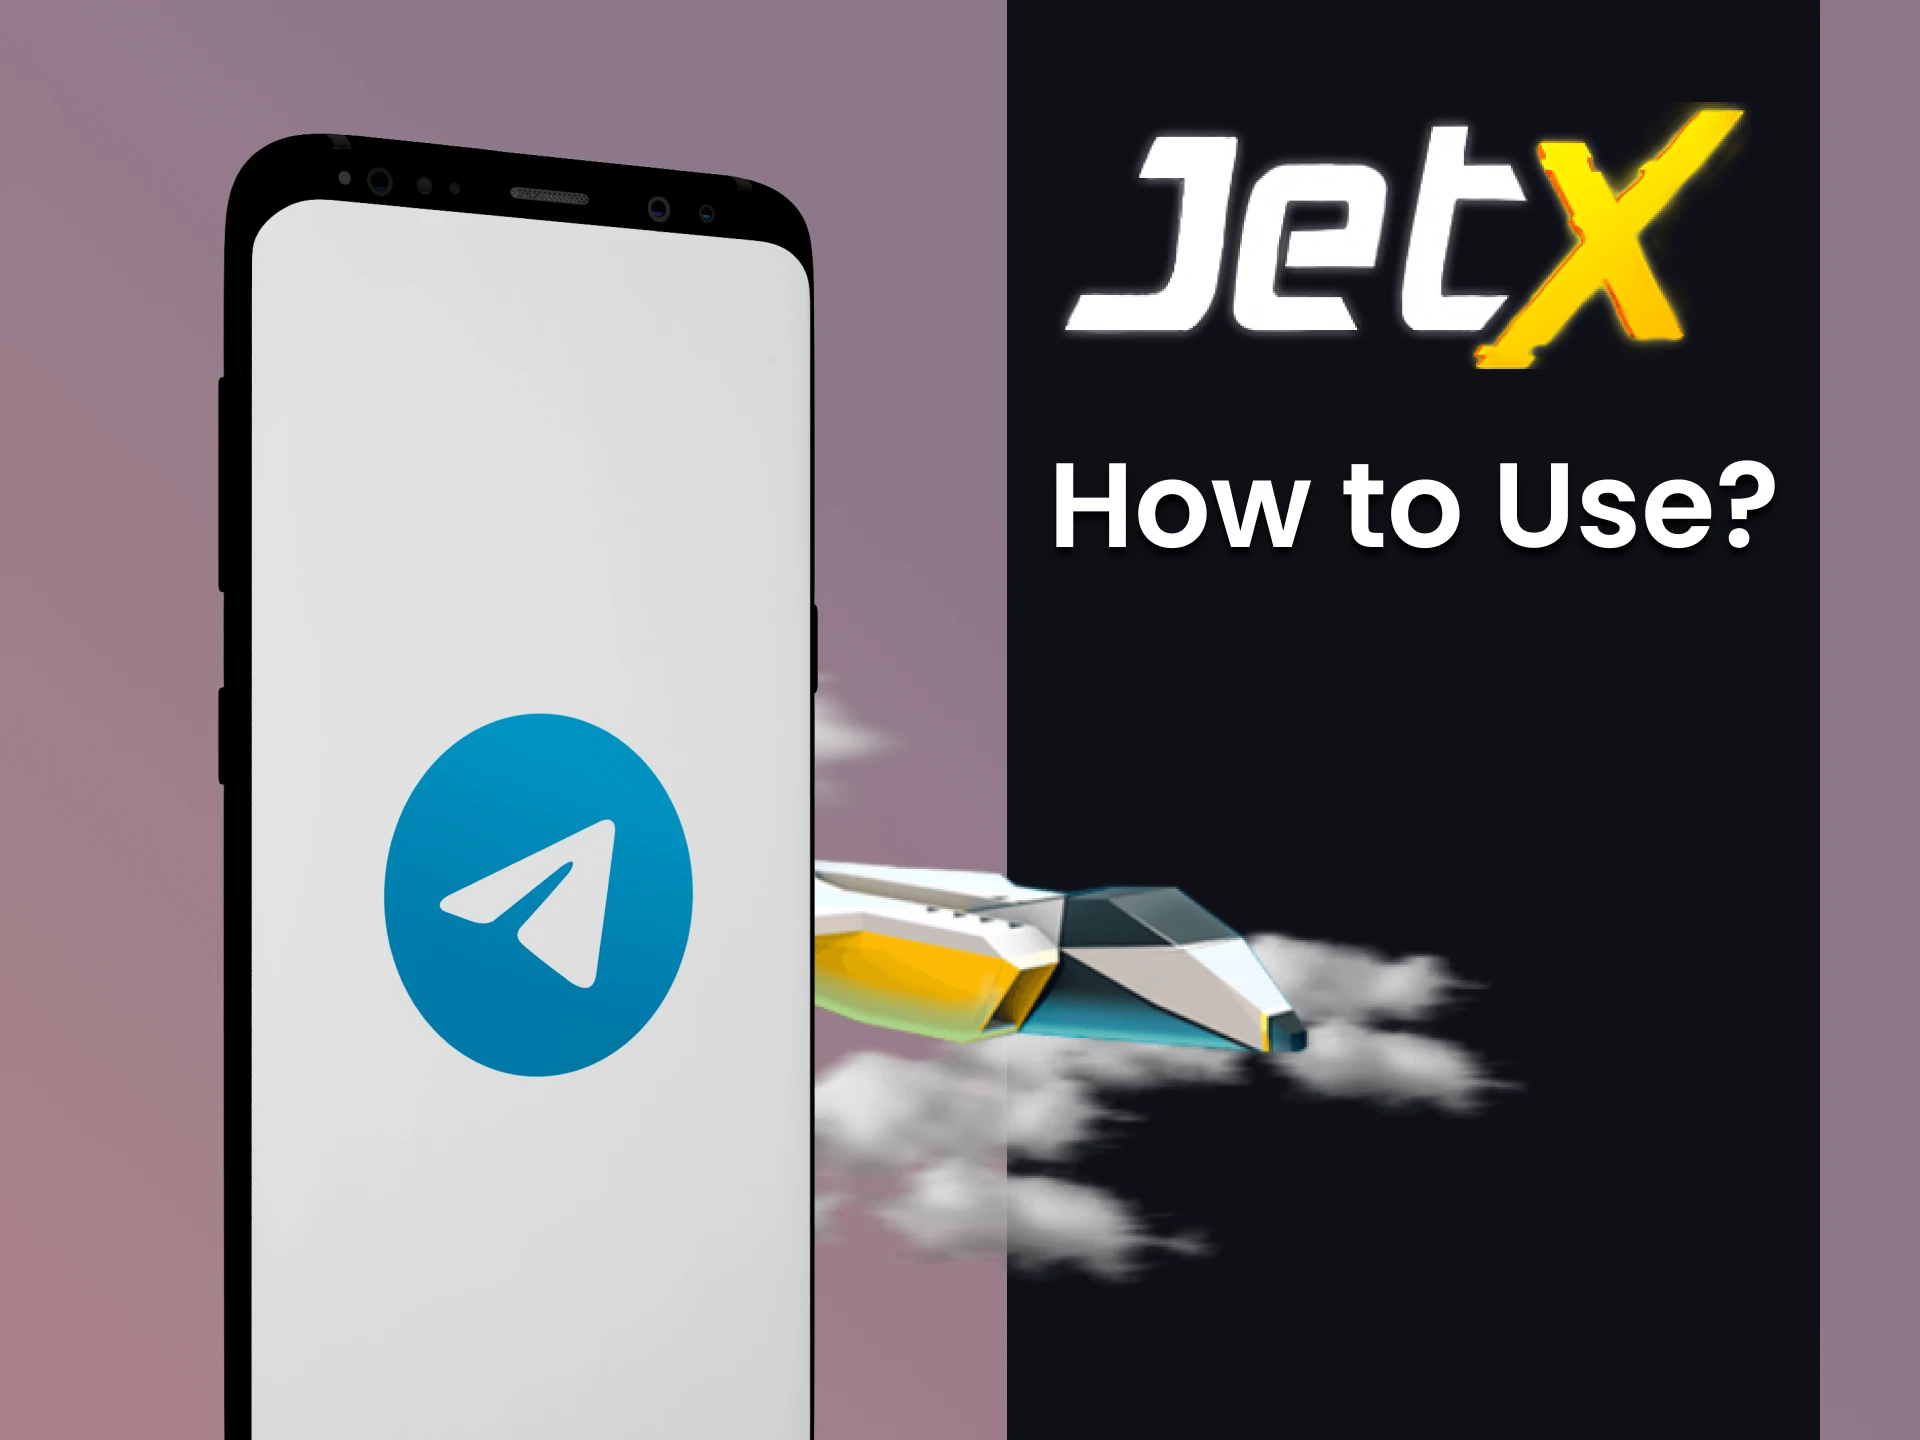 We will tell you how to use signals for the JetX game.